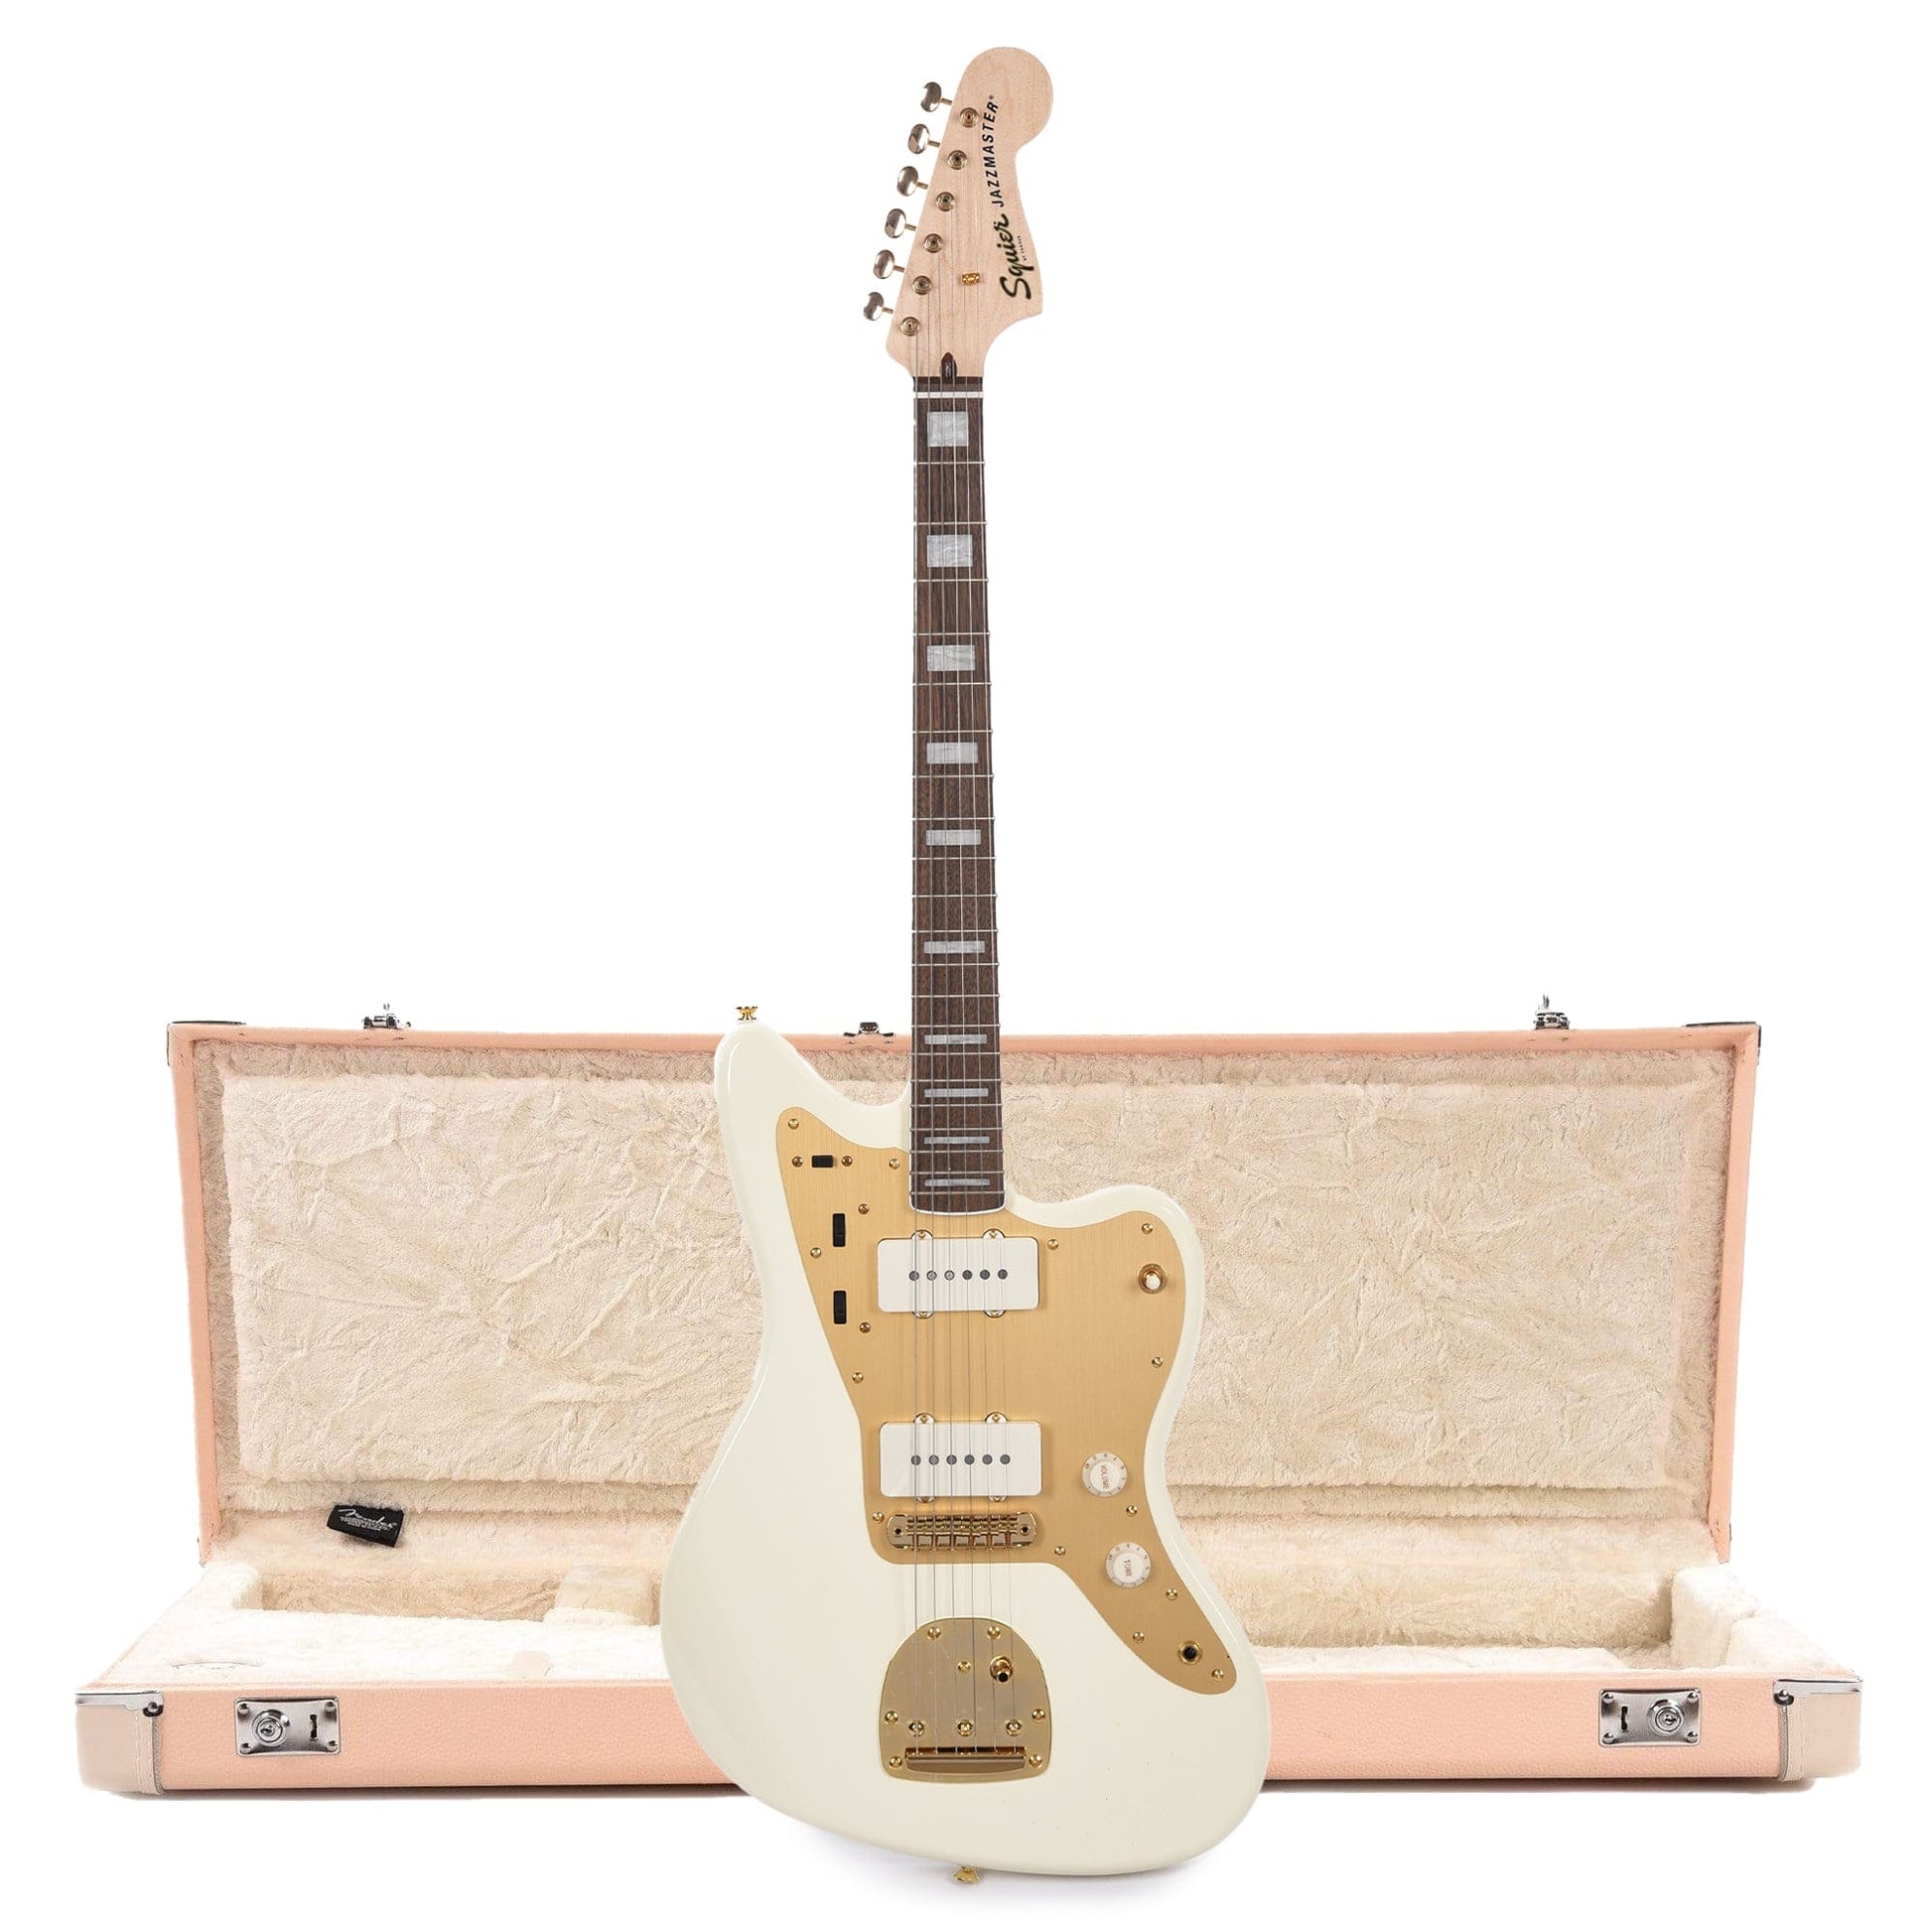 Squier 40th Anniversary Gold Edition Jazzmaster LRL Olympic White w/Gold Anodized Pickguard and Hardshell Case Jazzmaster/Jaguar Shell Pink w/Cream Interior (CME Exclusive) Electric Guitars / Solid Body